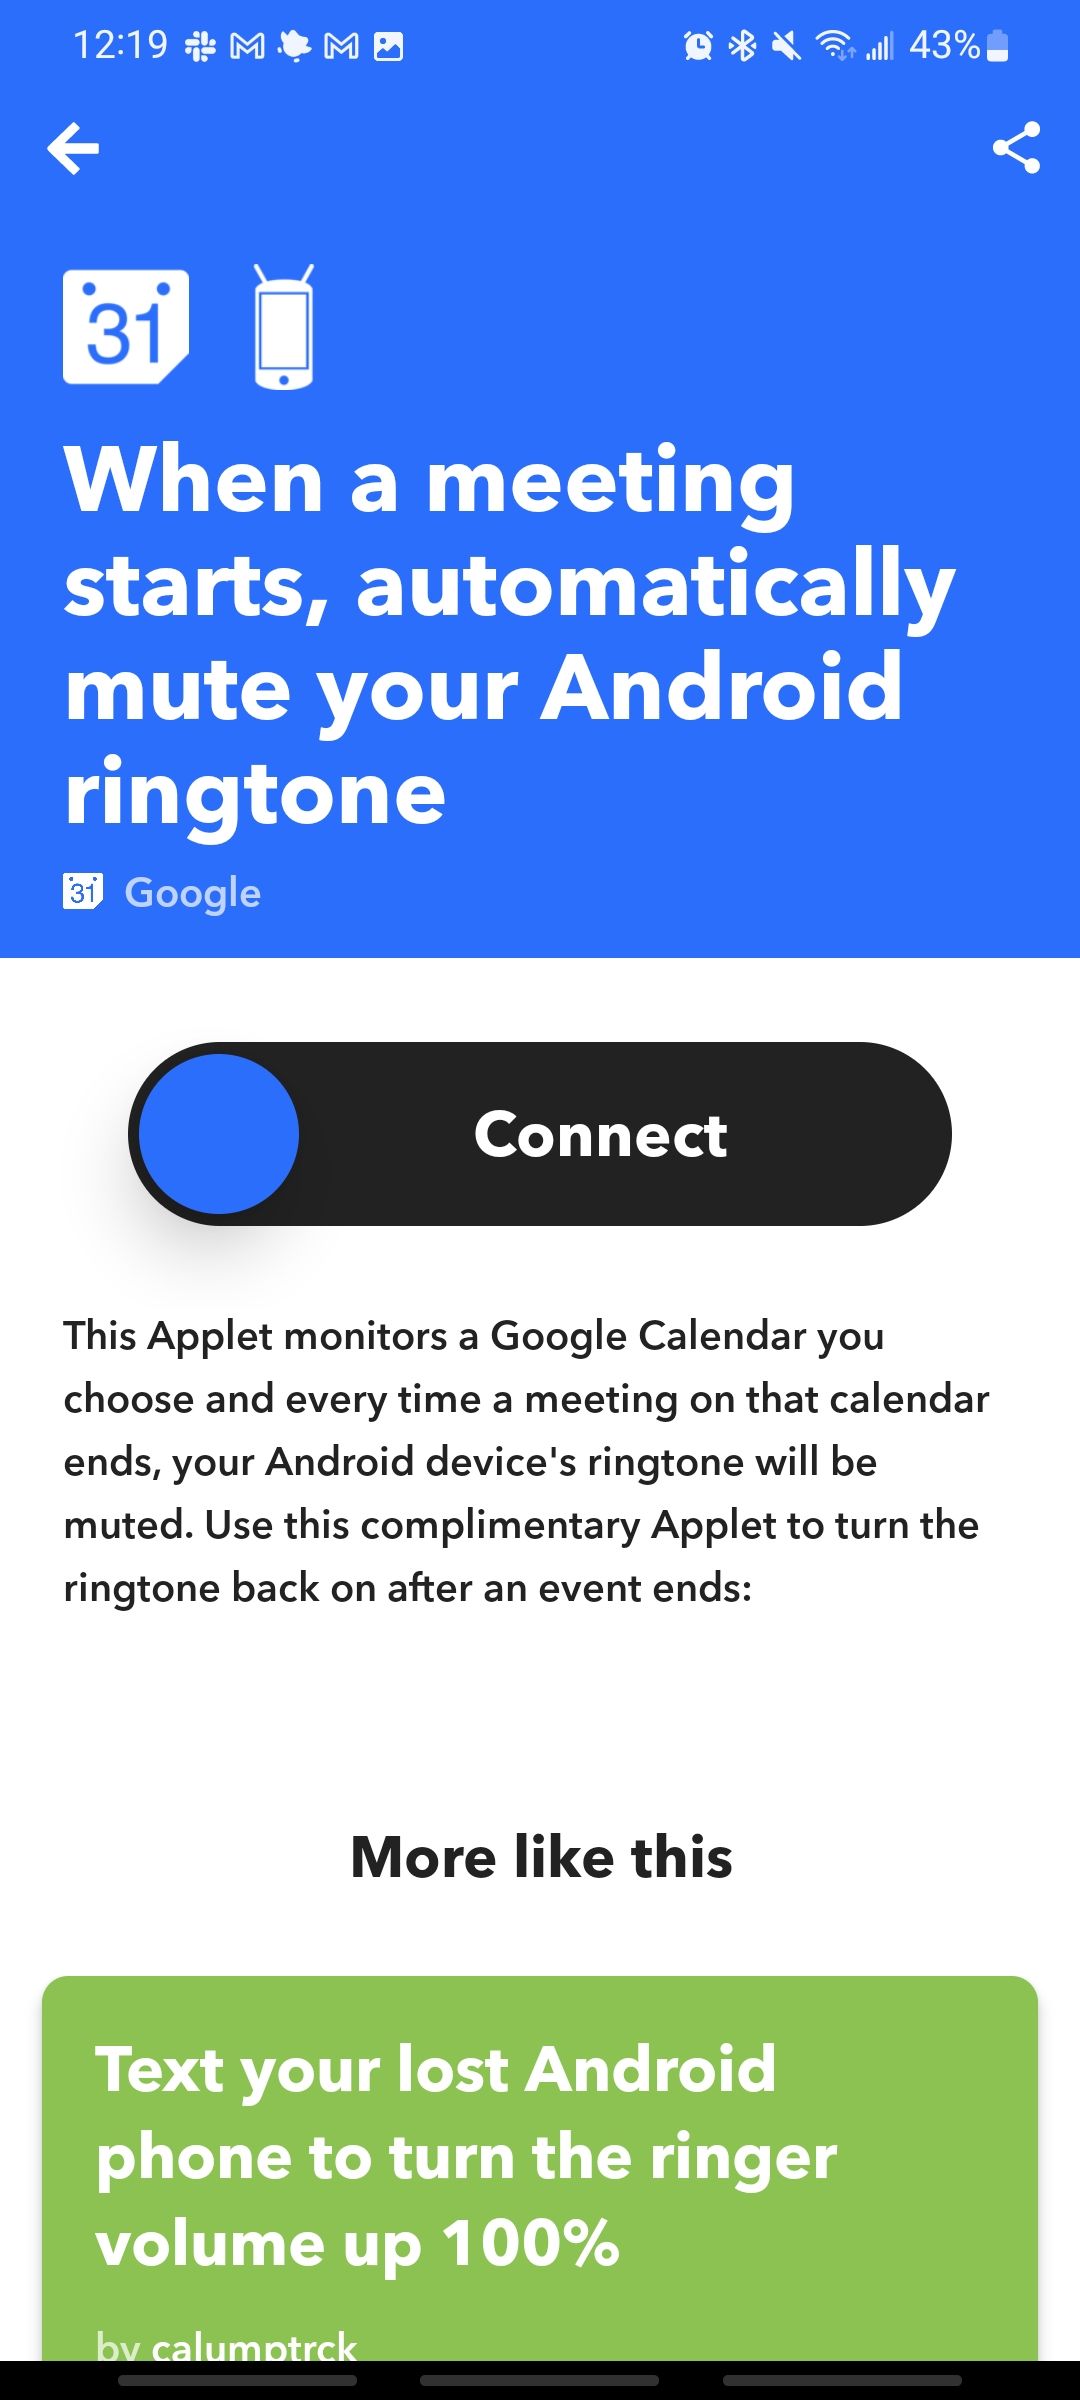 when a meeting starts, ifttt will mute your smartphone ringer